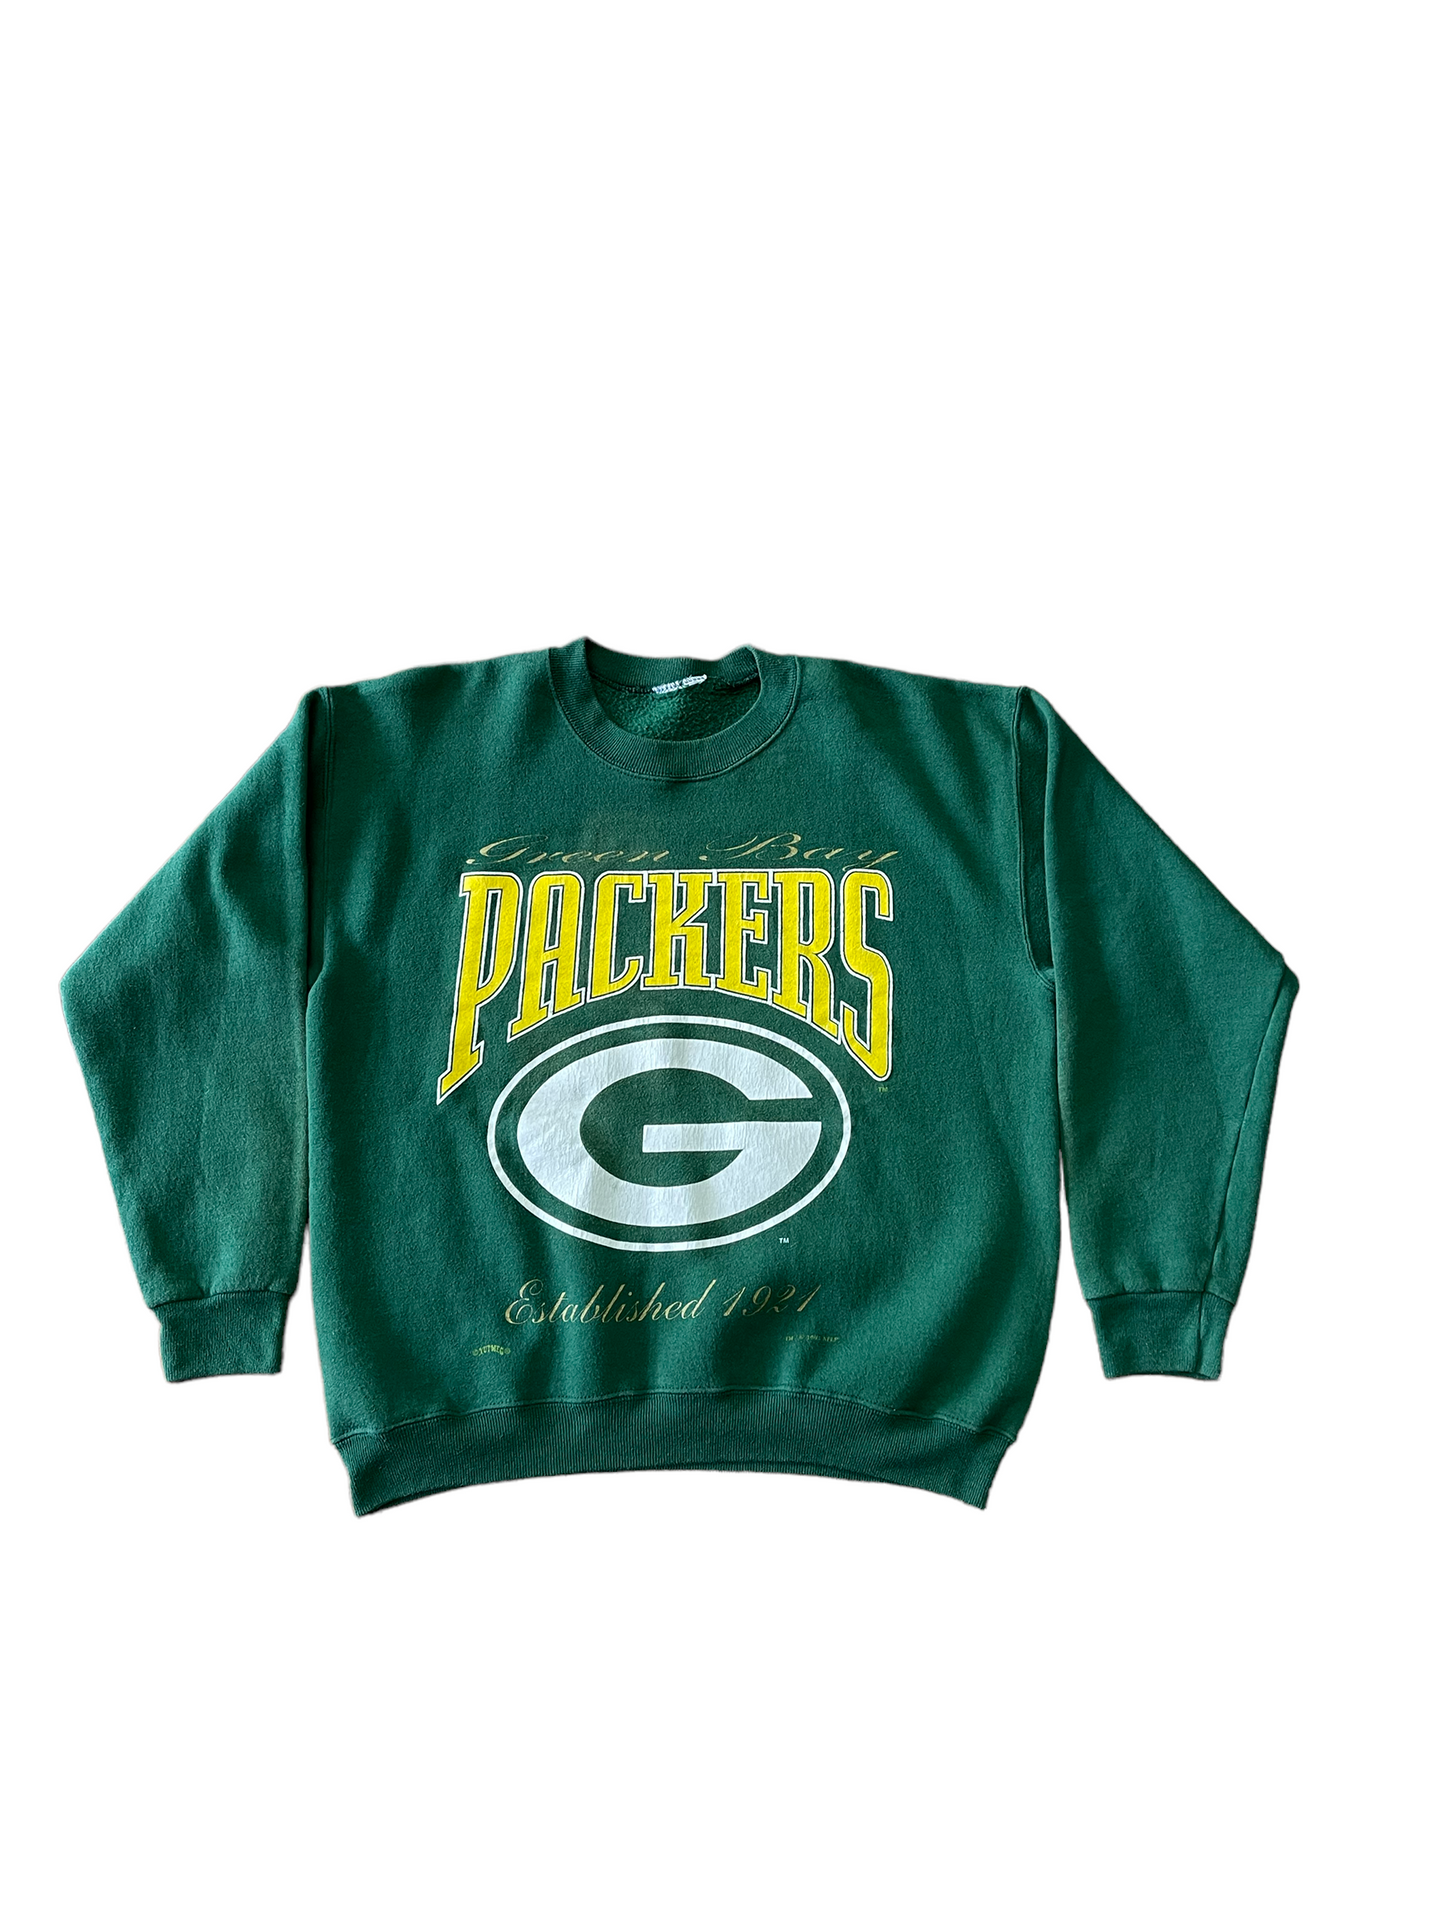 1995 Green Bay Packers Crew - Size L